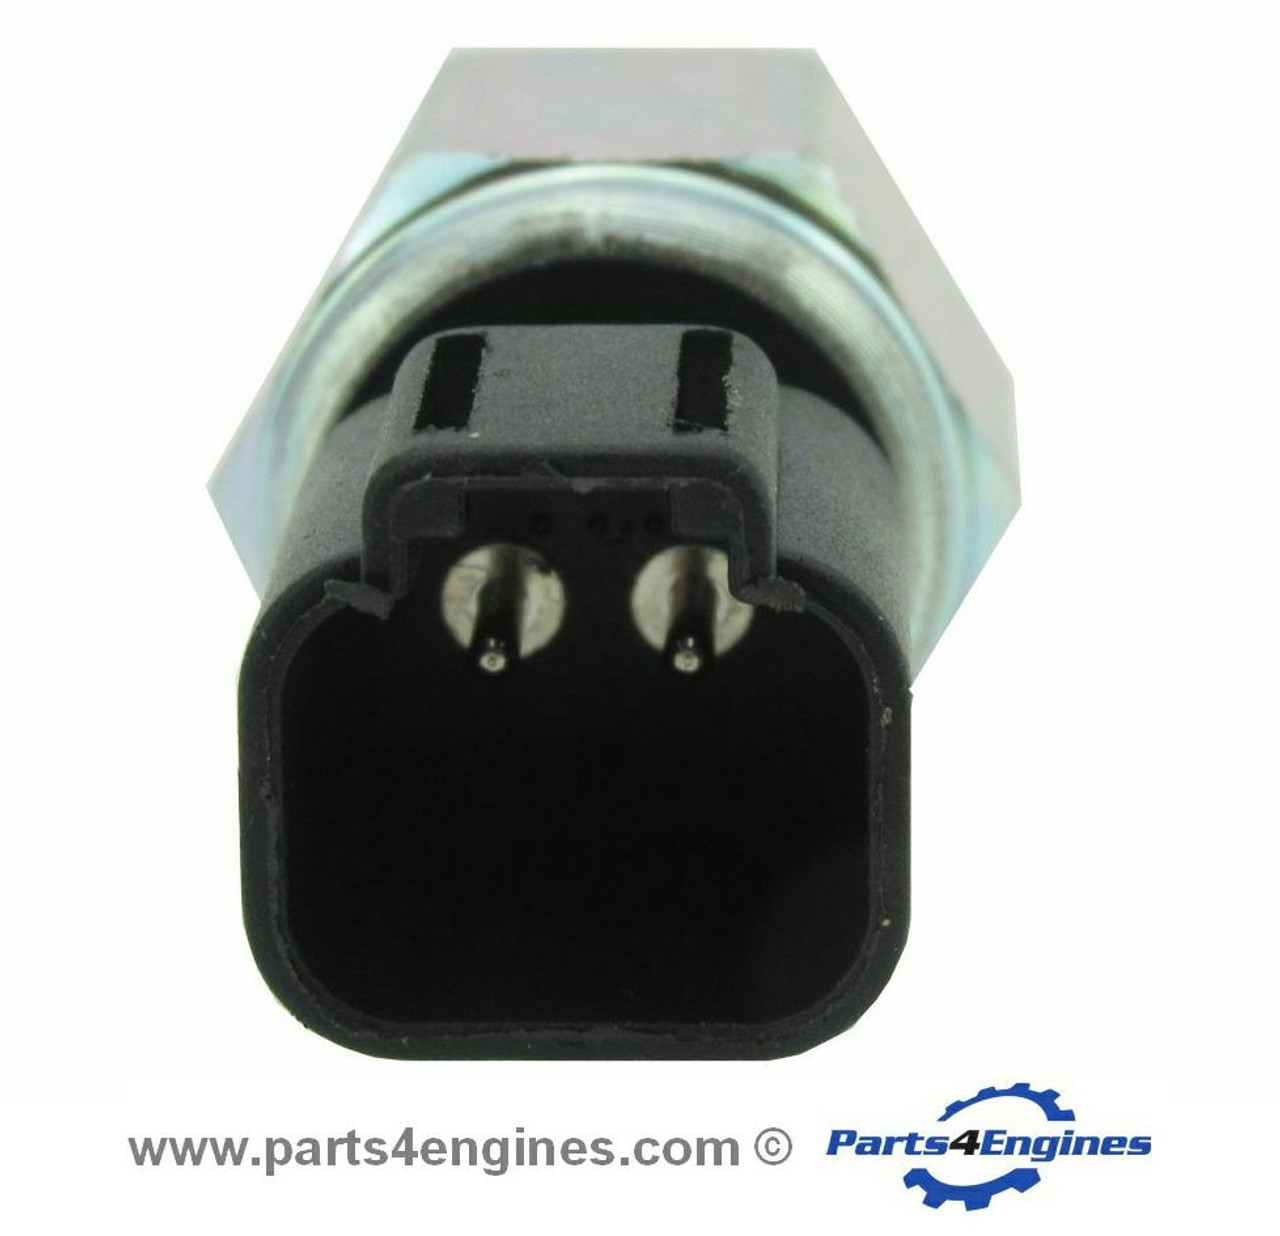 Volvo Penta D2-40 Oil pressure switch , from Parts4Engine.com